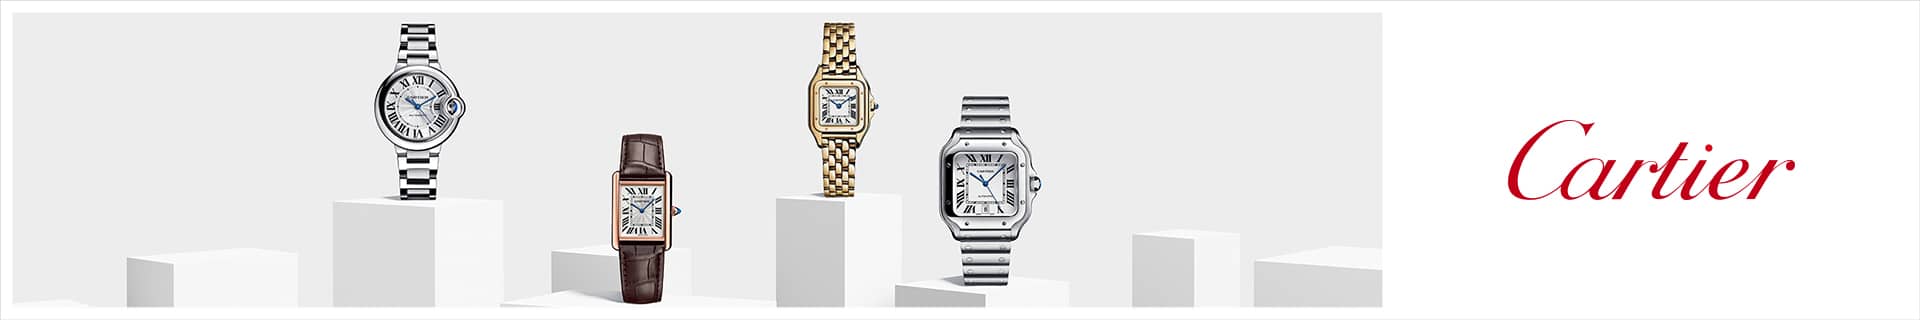 Cartier Brand Icons Banner